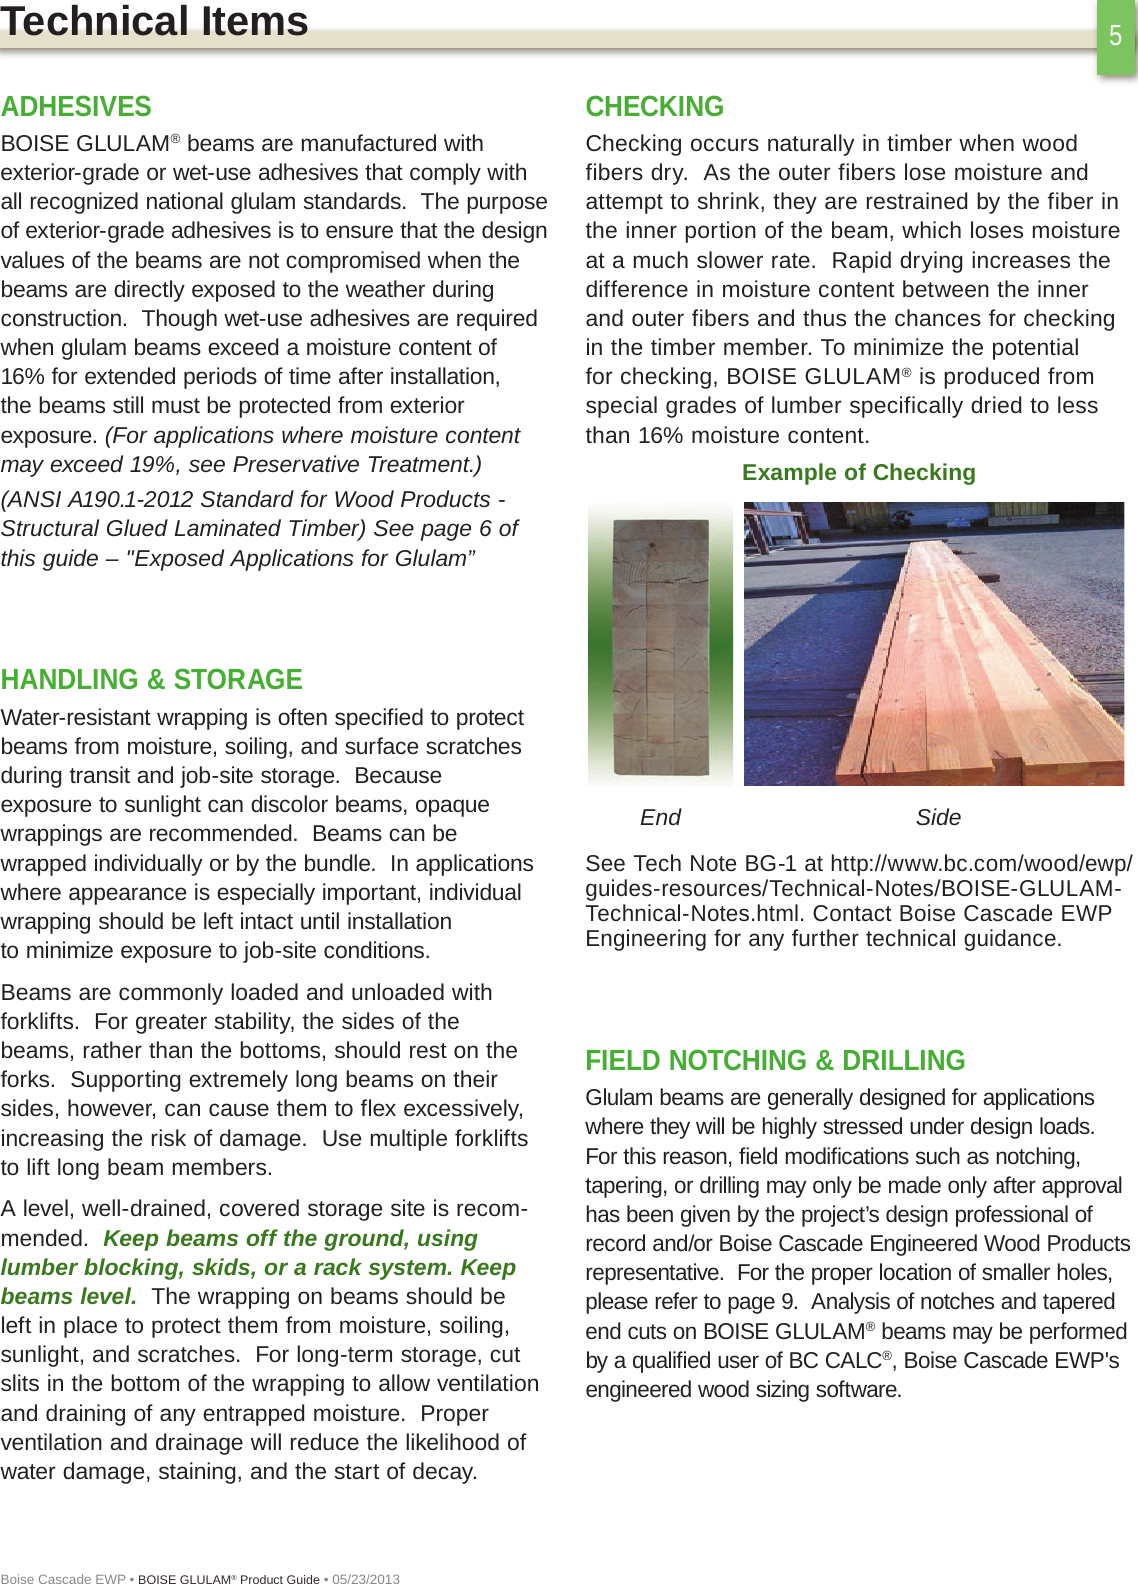 Page 5 of 12 - Boise Glulam Product Guide